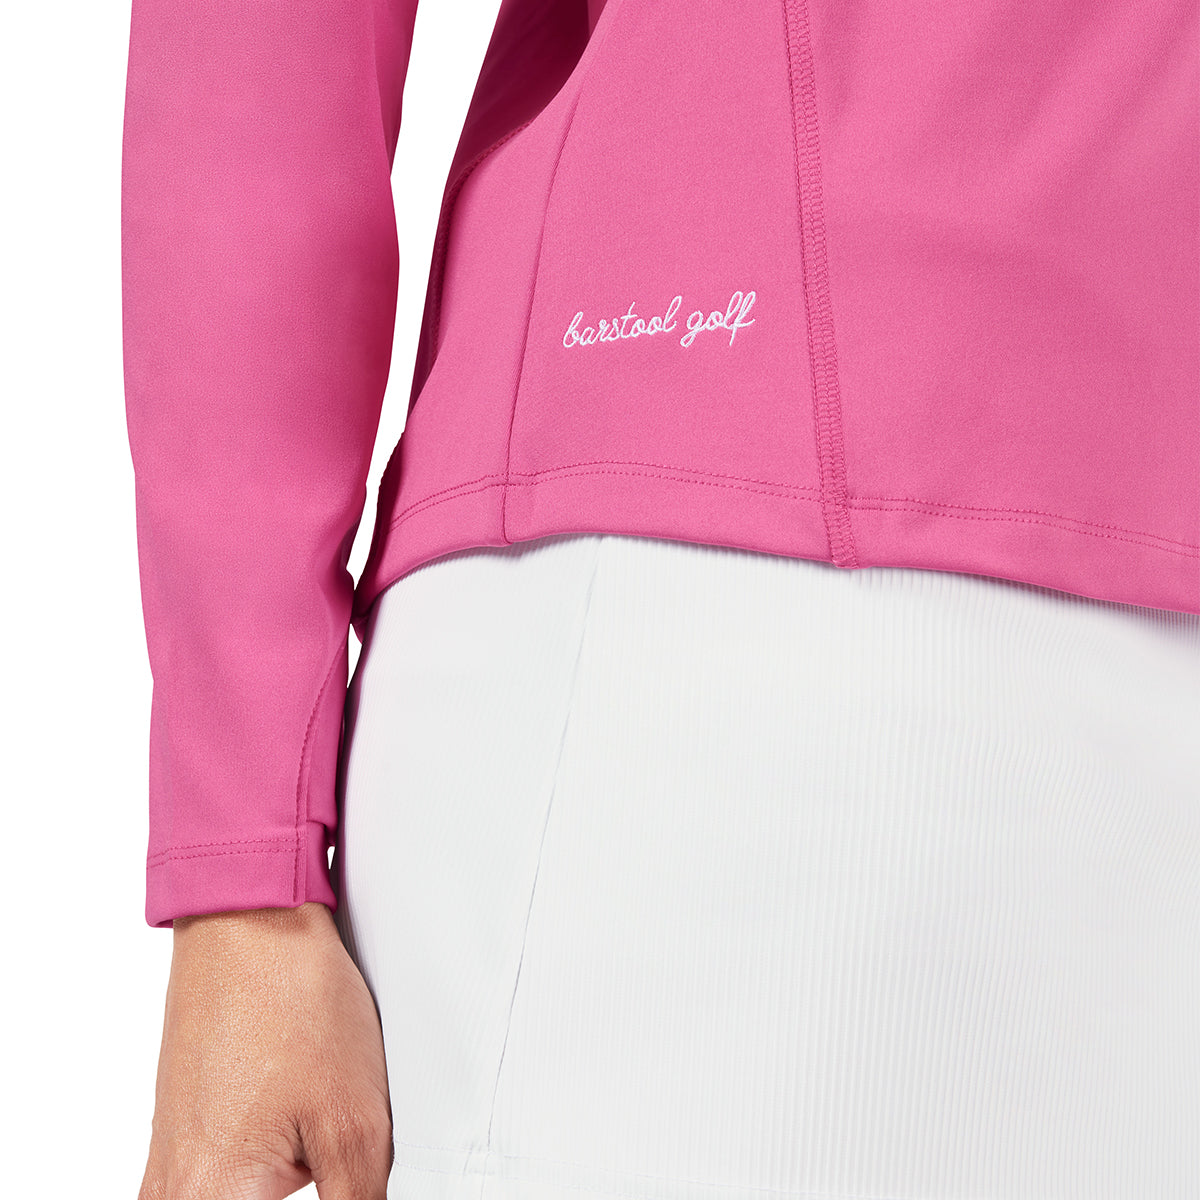 Barstool Golf Women's Quarter-Zip-Pullovers-Fore Play-Barstool Sports